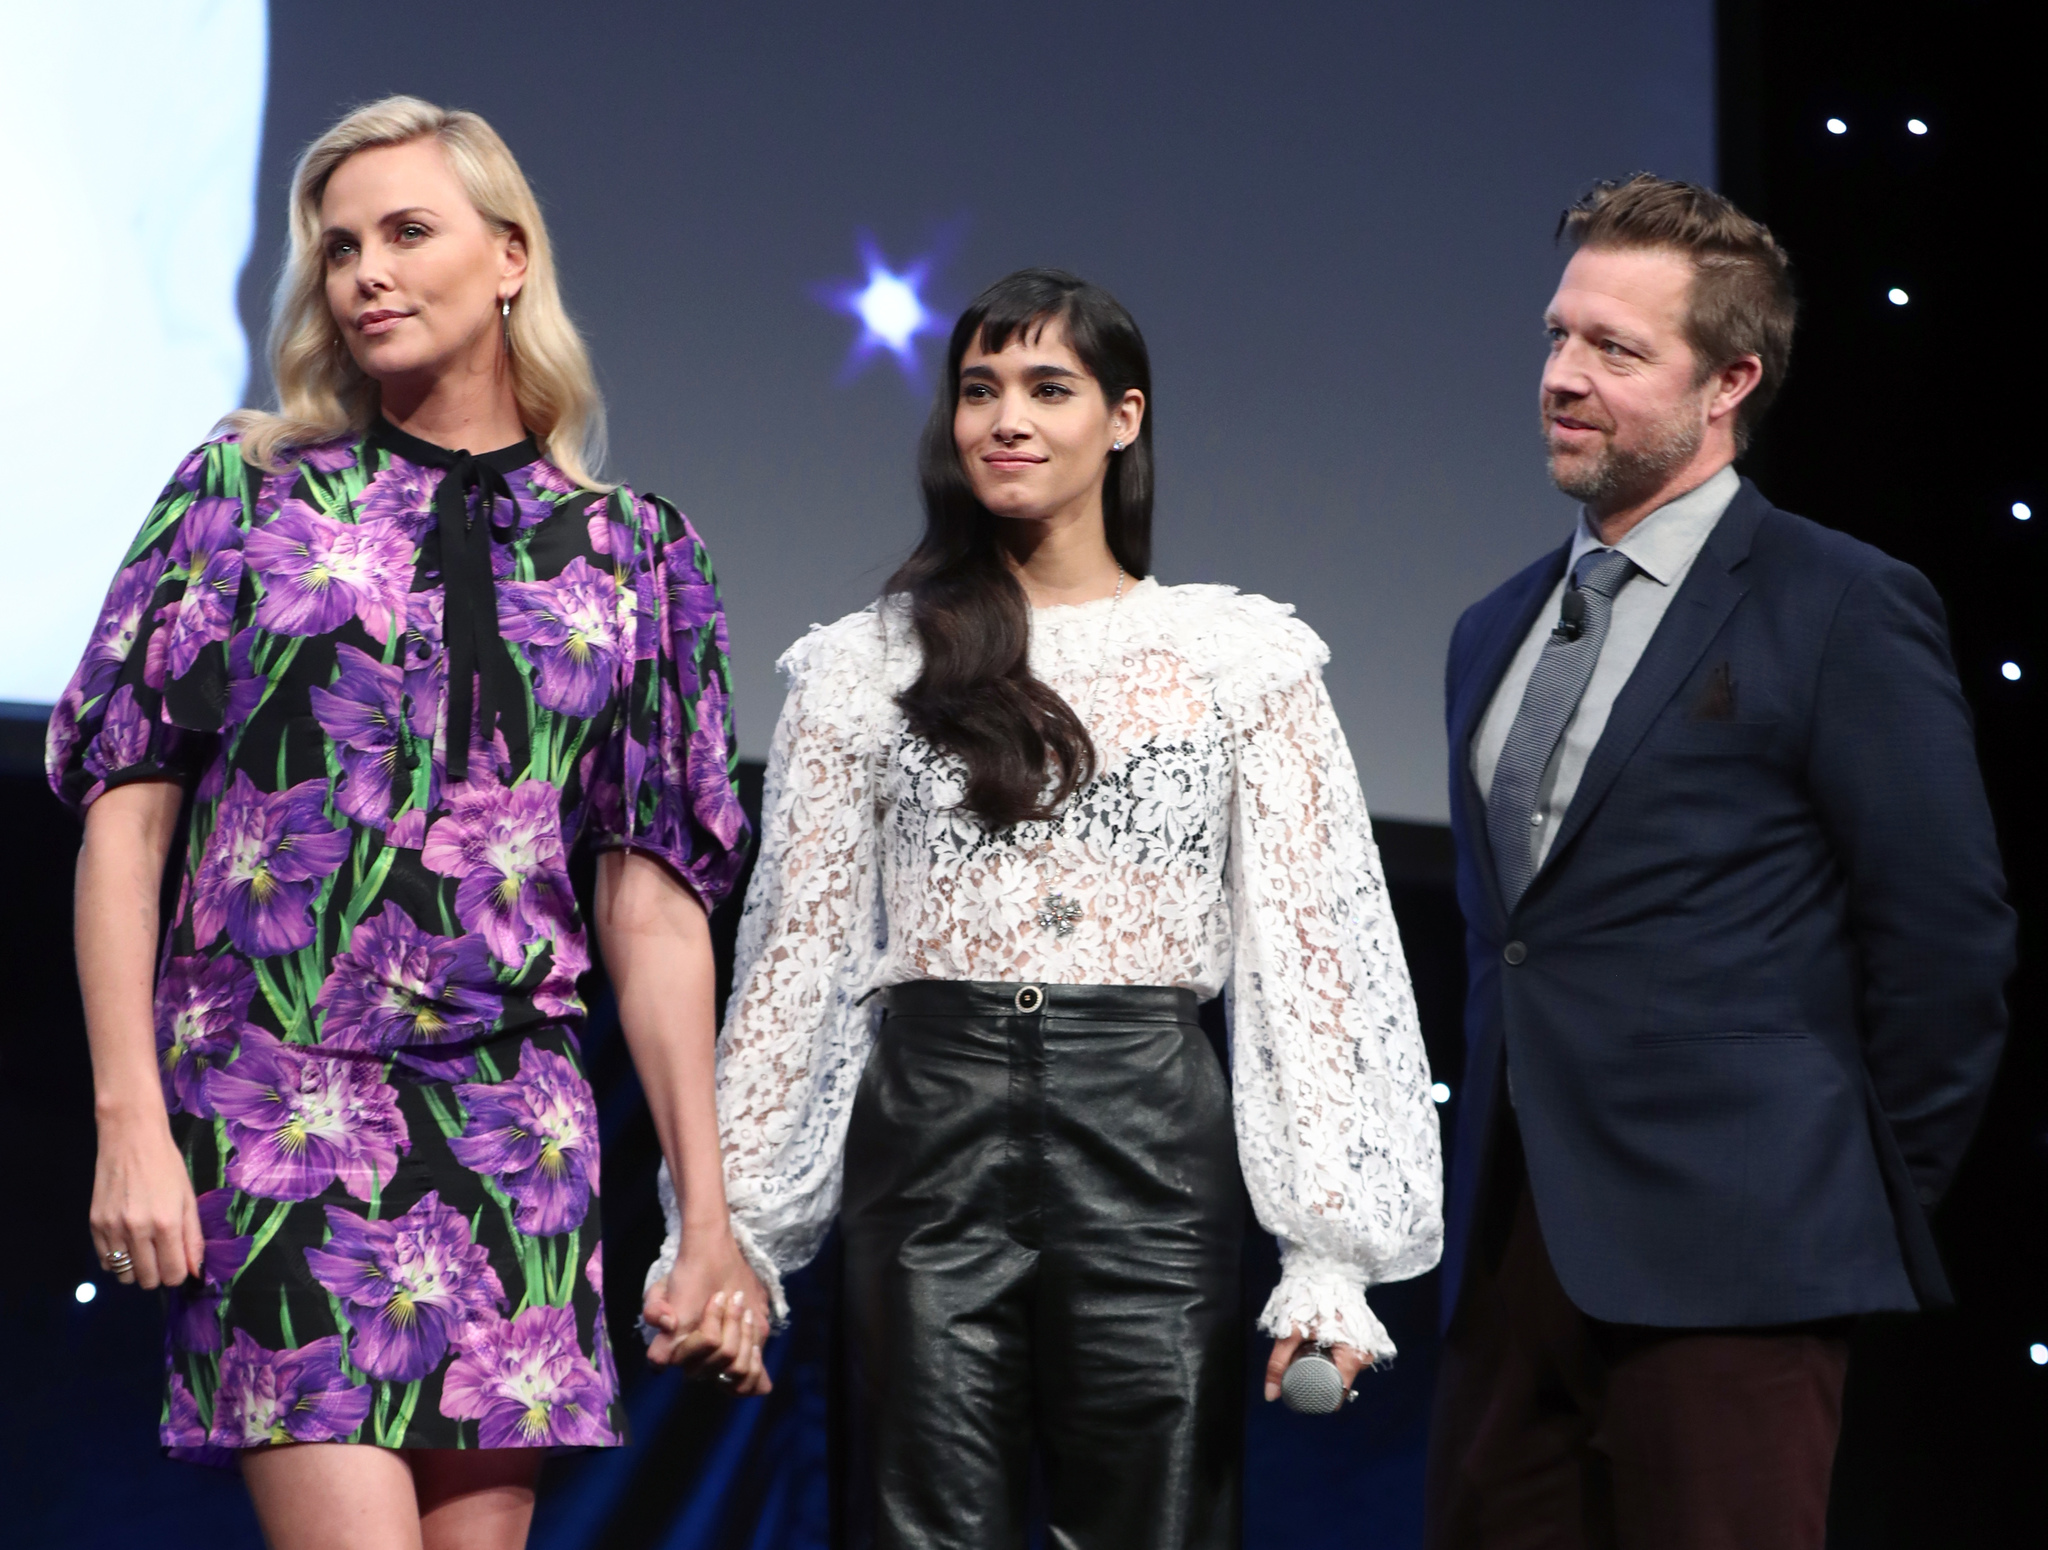 Charlize Theron, David Leitch, and Sofia Boutella at an event for Atomic Blonde (2017)